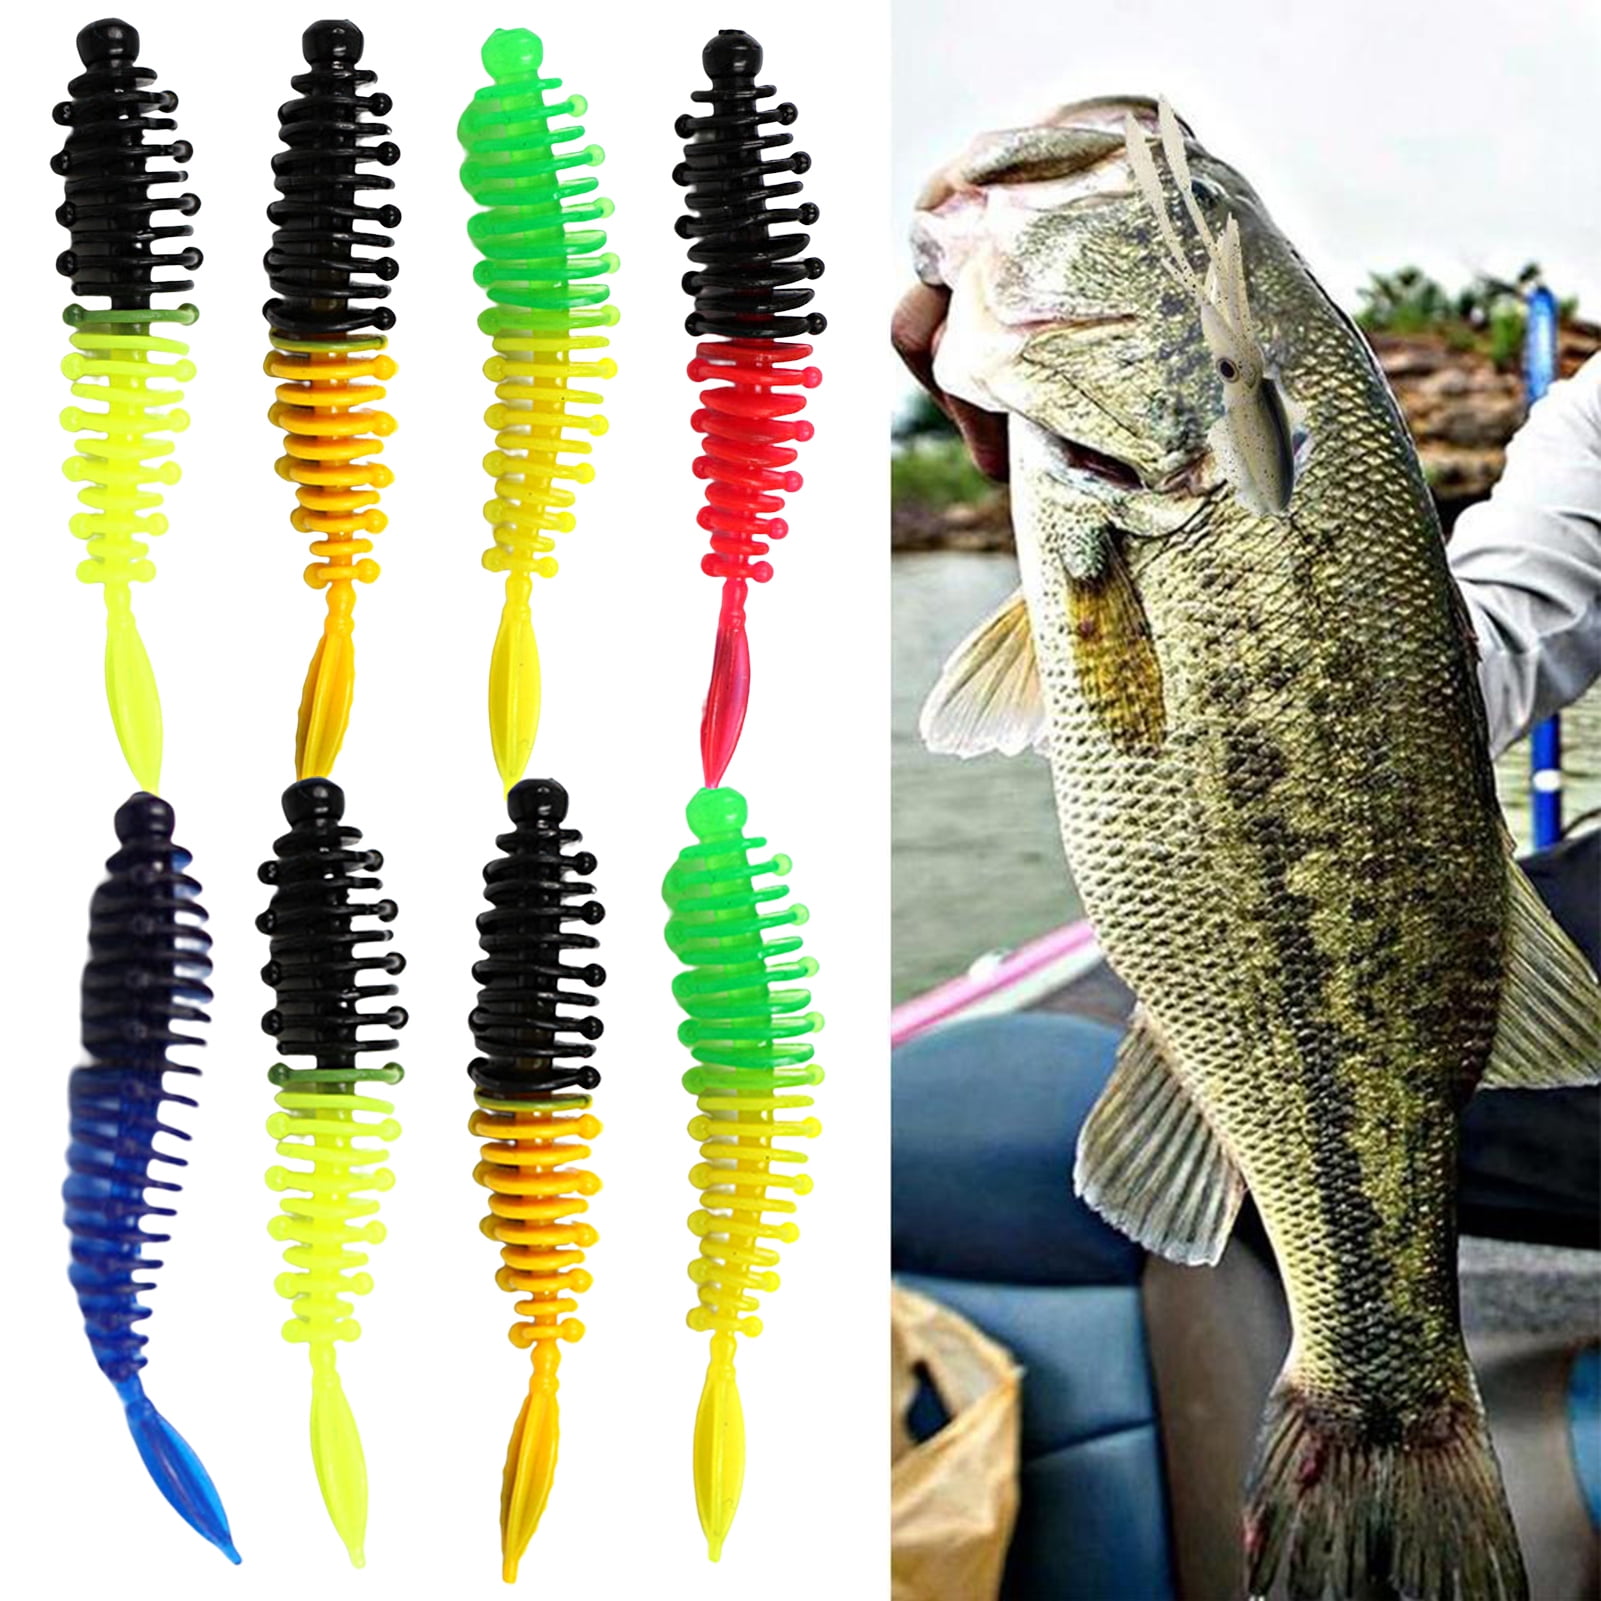 Happy Date 8Pcs/Set 5.5cm/1.3g Soft Fishing Lures for Bass Jig Head Fishing  Soft Plastic Lures with Hook Sinking Swimbaits for Saltwater and Freshwater  Fishing Lures Kit 